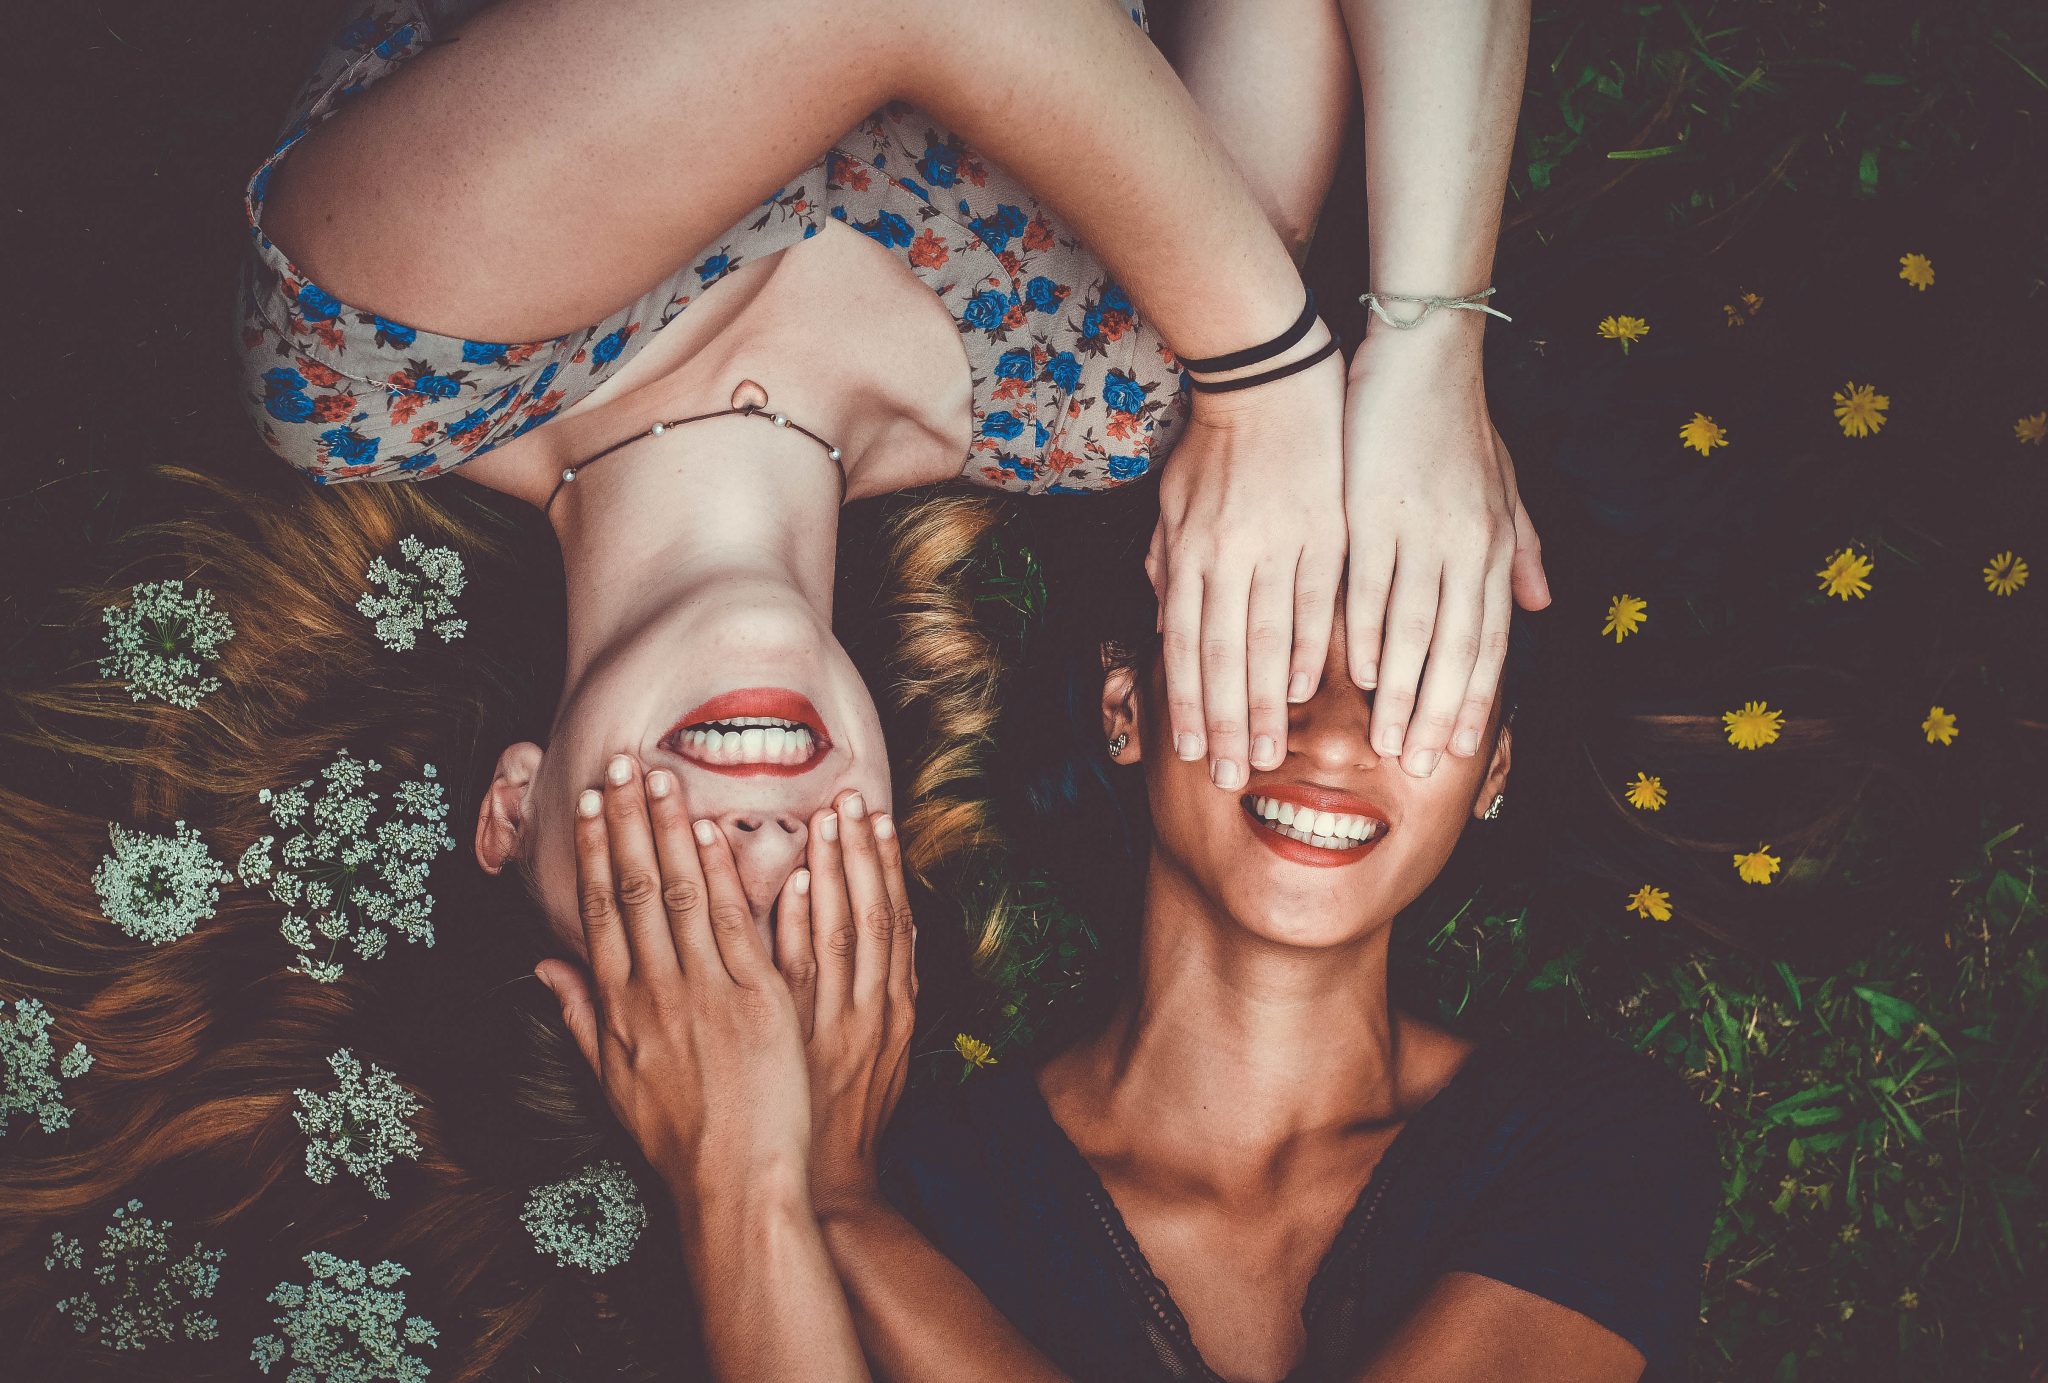 Two women lying on the ground covering each other's eyes.